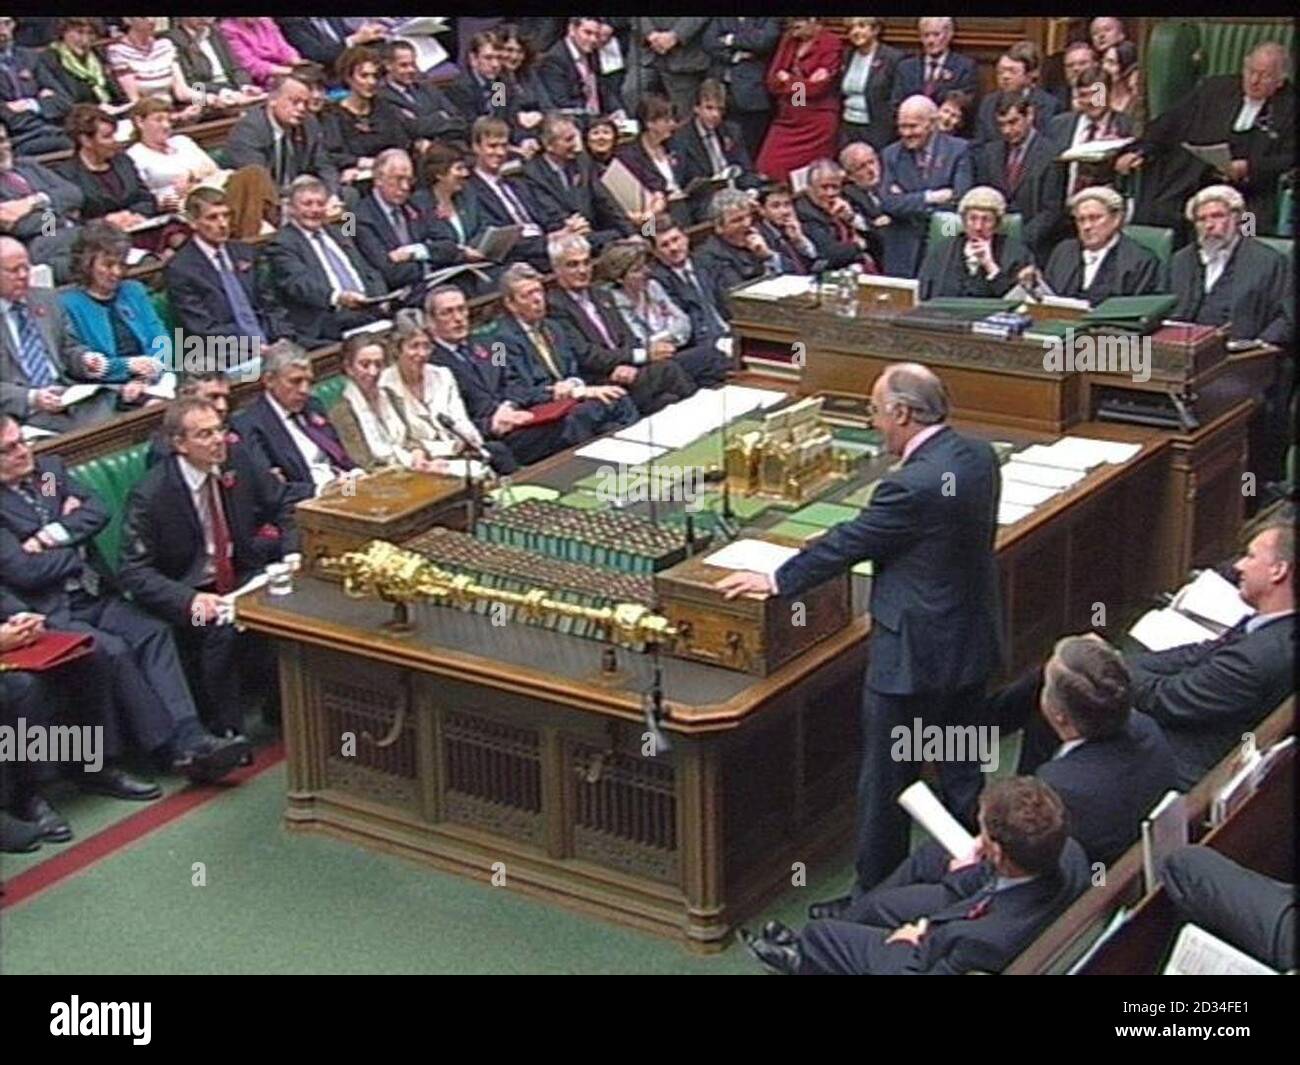 Leader of the Conservative party, Michael Howard, speaks during Prime Minister's Questions in the House of Commons, Wednesday November 2 2005. PRESS ASSOCIATION photo. Photo credit should read: PA Stock Photo